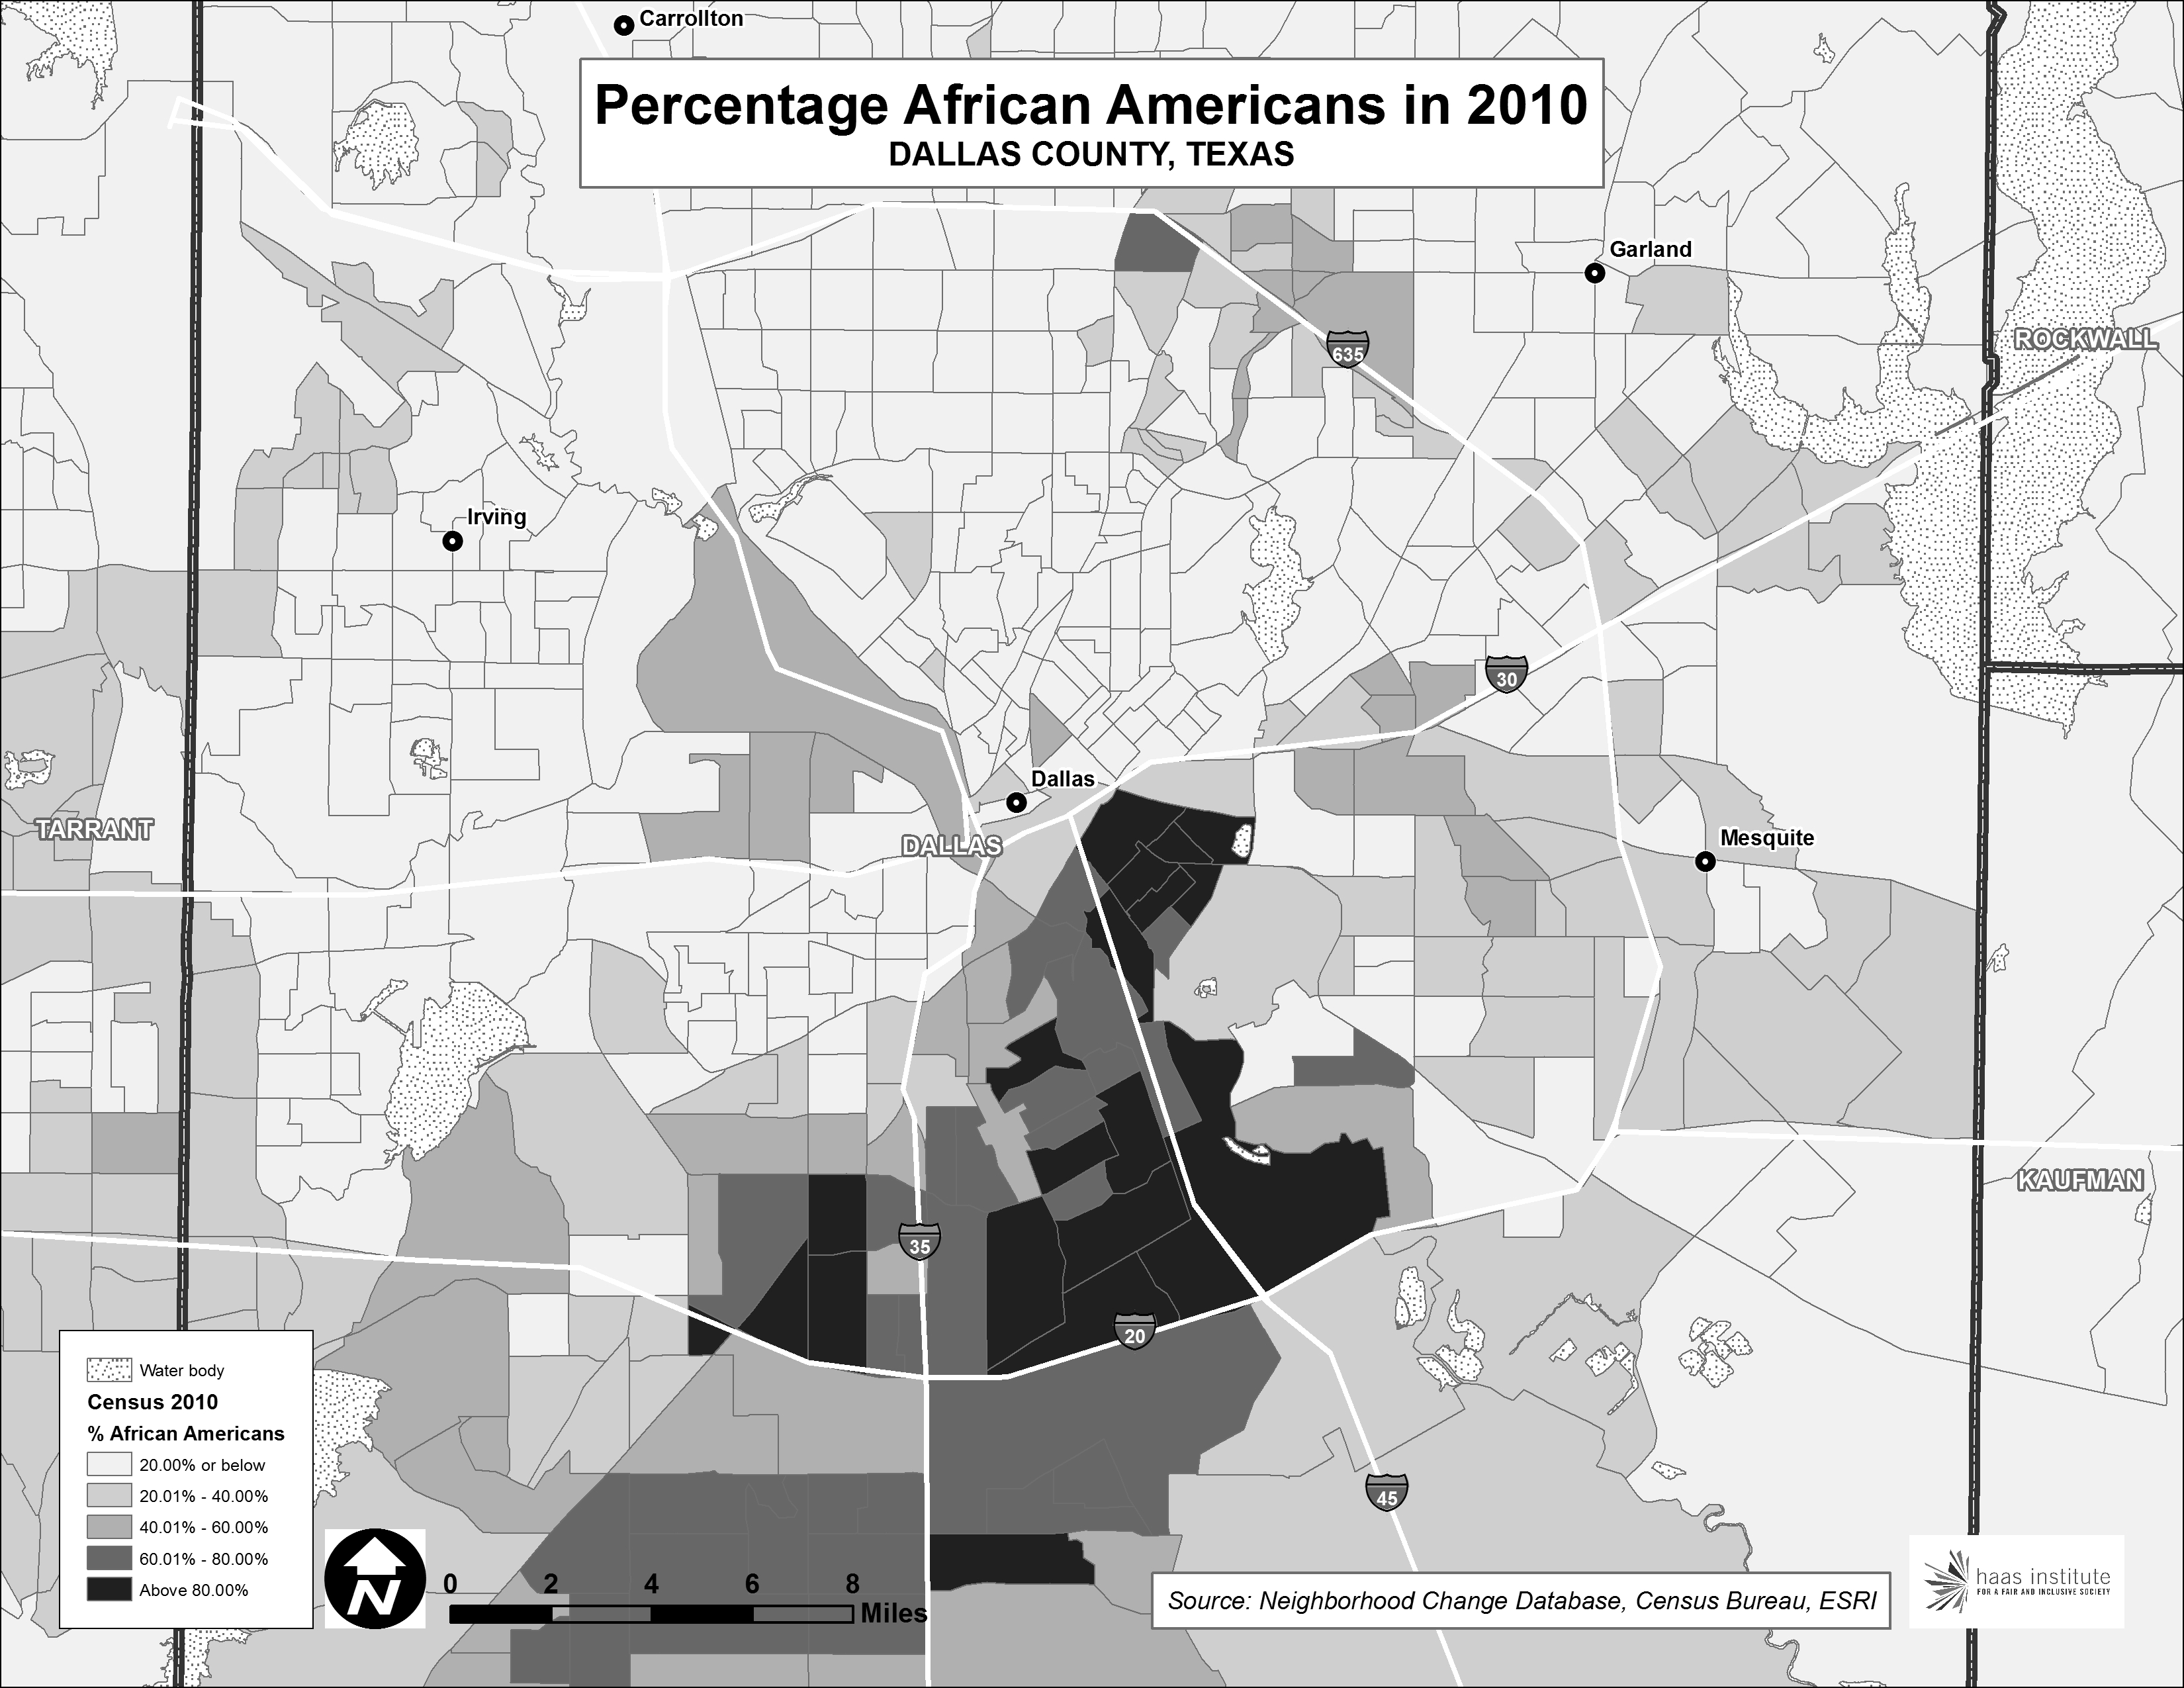 The percentage of African Americans, by census tract, in Dallas County, in 2010.